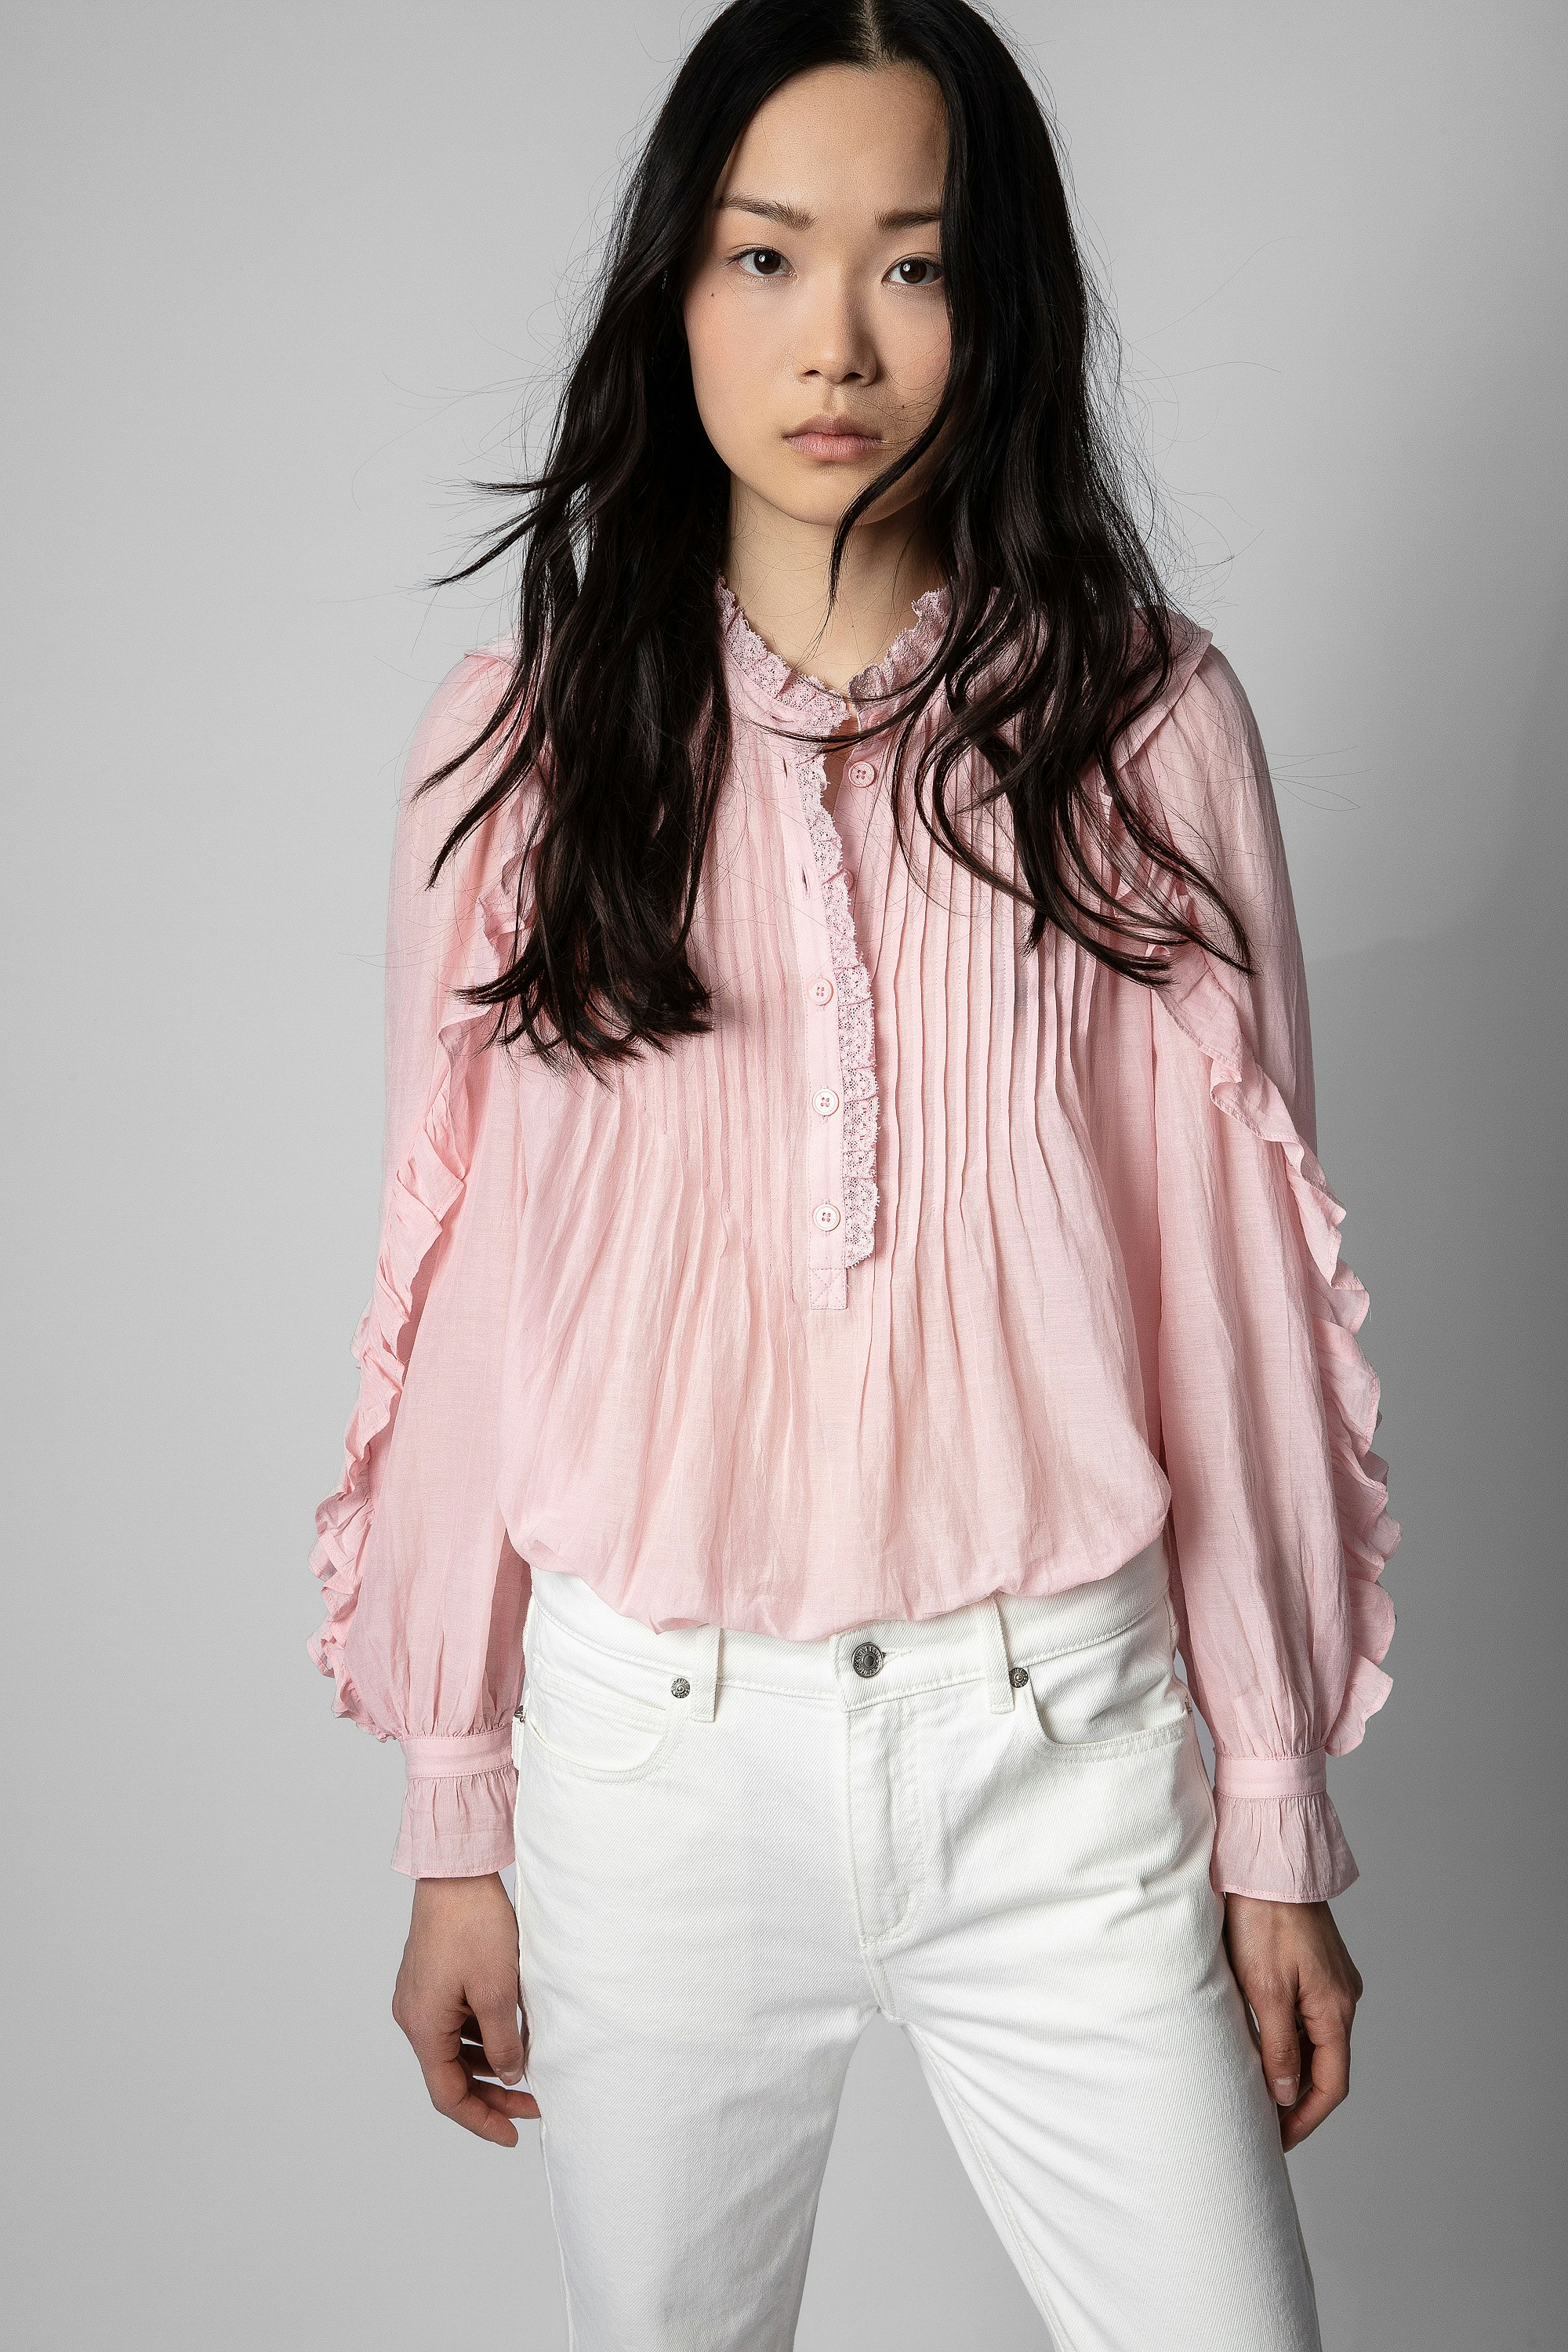 Timmy ブラウズ - Women's pink cotton blouse with ruffles